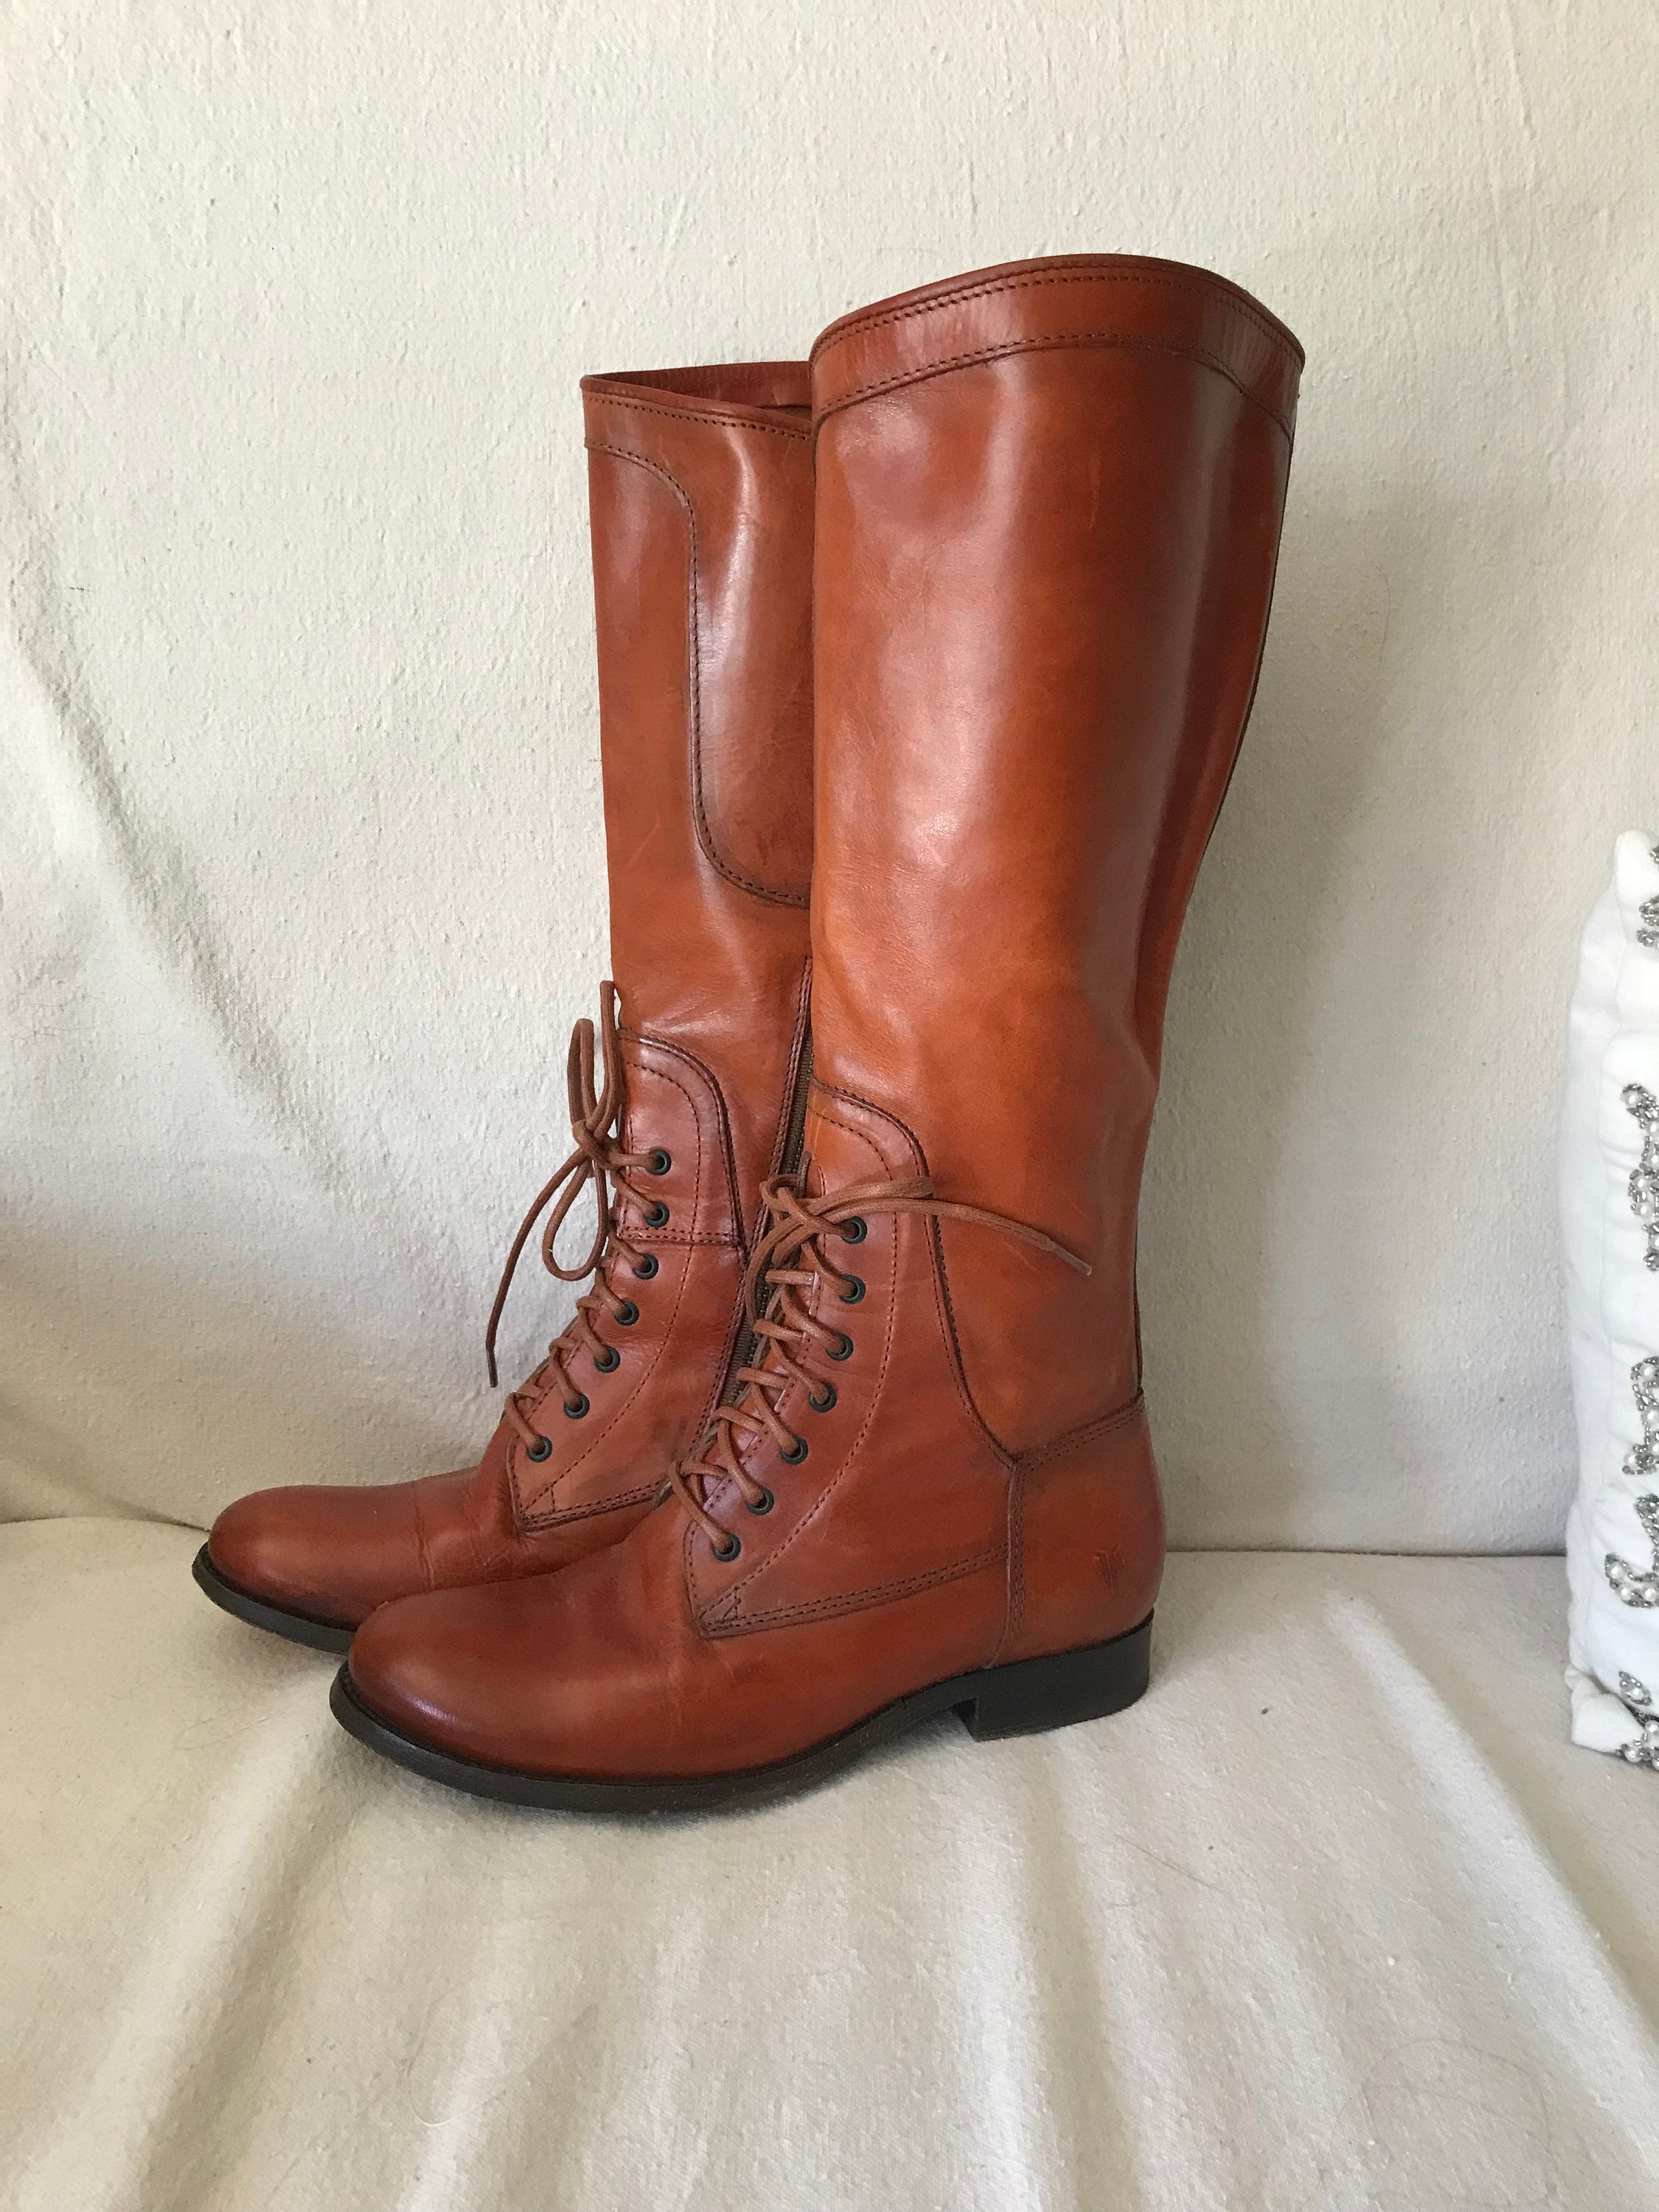 Vintage Bort Carleton Tall Leather Lace Up Boots, 1970s stacked wood heel  campus boots, 70s blue laced combat hippie gypsy boots, Women's 8